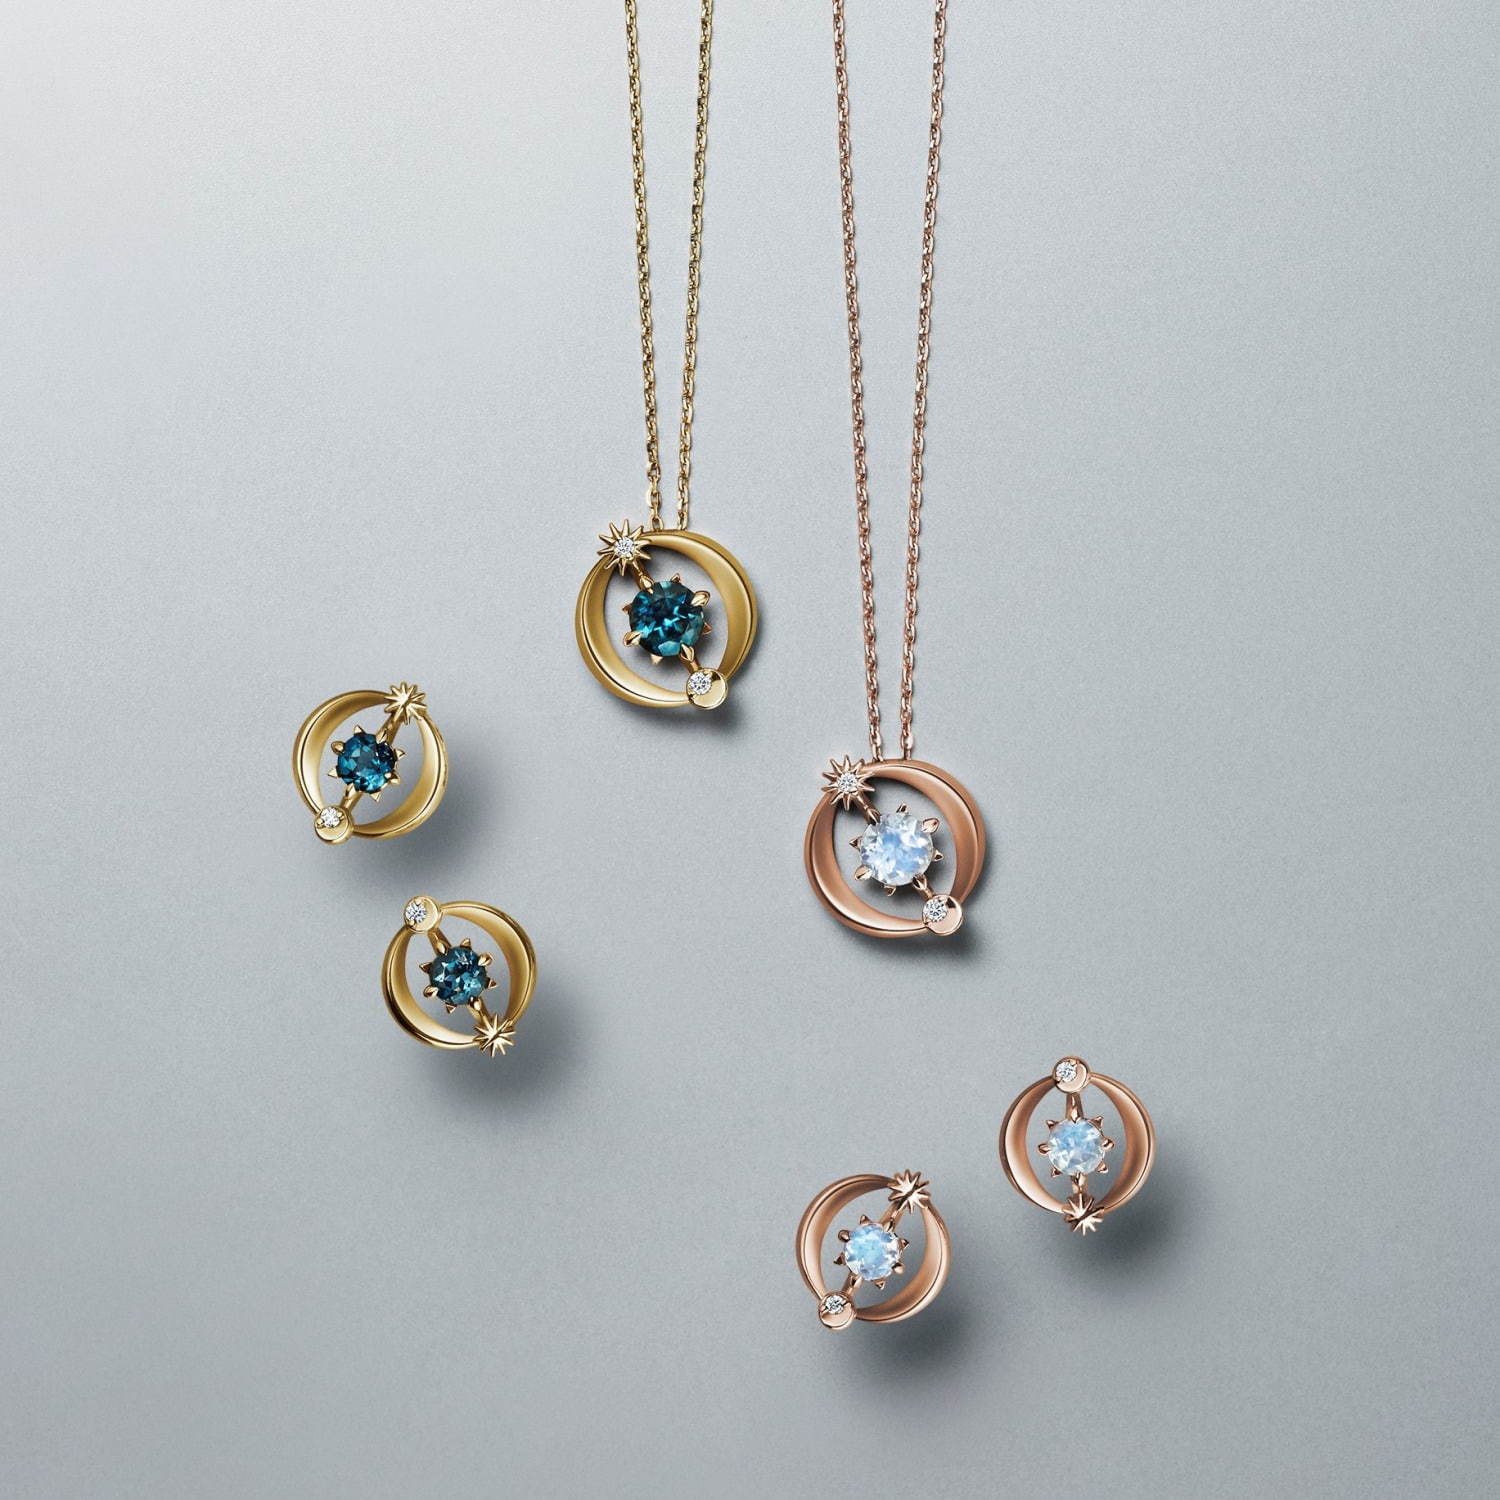 STAR JEWELRY ネックレス 限定品-